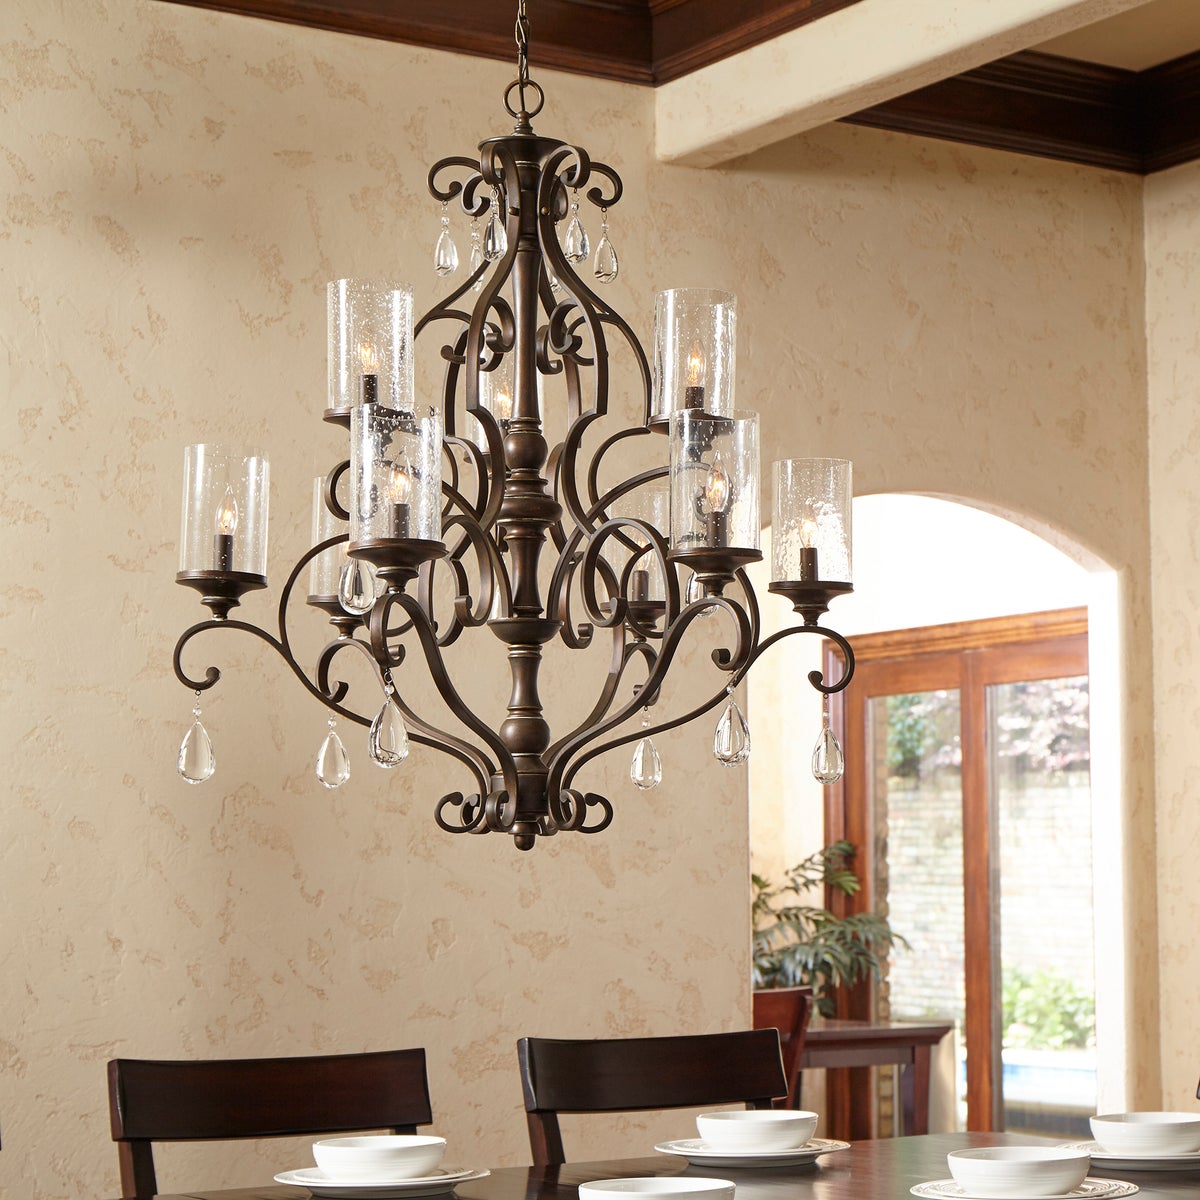 A Spanish chandelier with curved arms and clear crystal accents, adding a touch of sophistication to your space. Brand: Quorum International. Wattage: 60W. Input Voltage: 120V. Number of Bulbs: 9. Bulbs Included: No. Bulb Base Type: Candelabra E12. Dimmable: Yes. Certifications: UL Listed. Safety Rating: Dry Location. Finish: Persian White, Vintage Copper. Dimensions: 32"W x 37"H. Warranty: 2 Years.